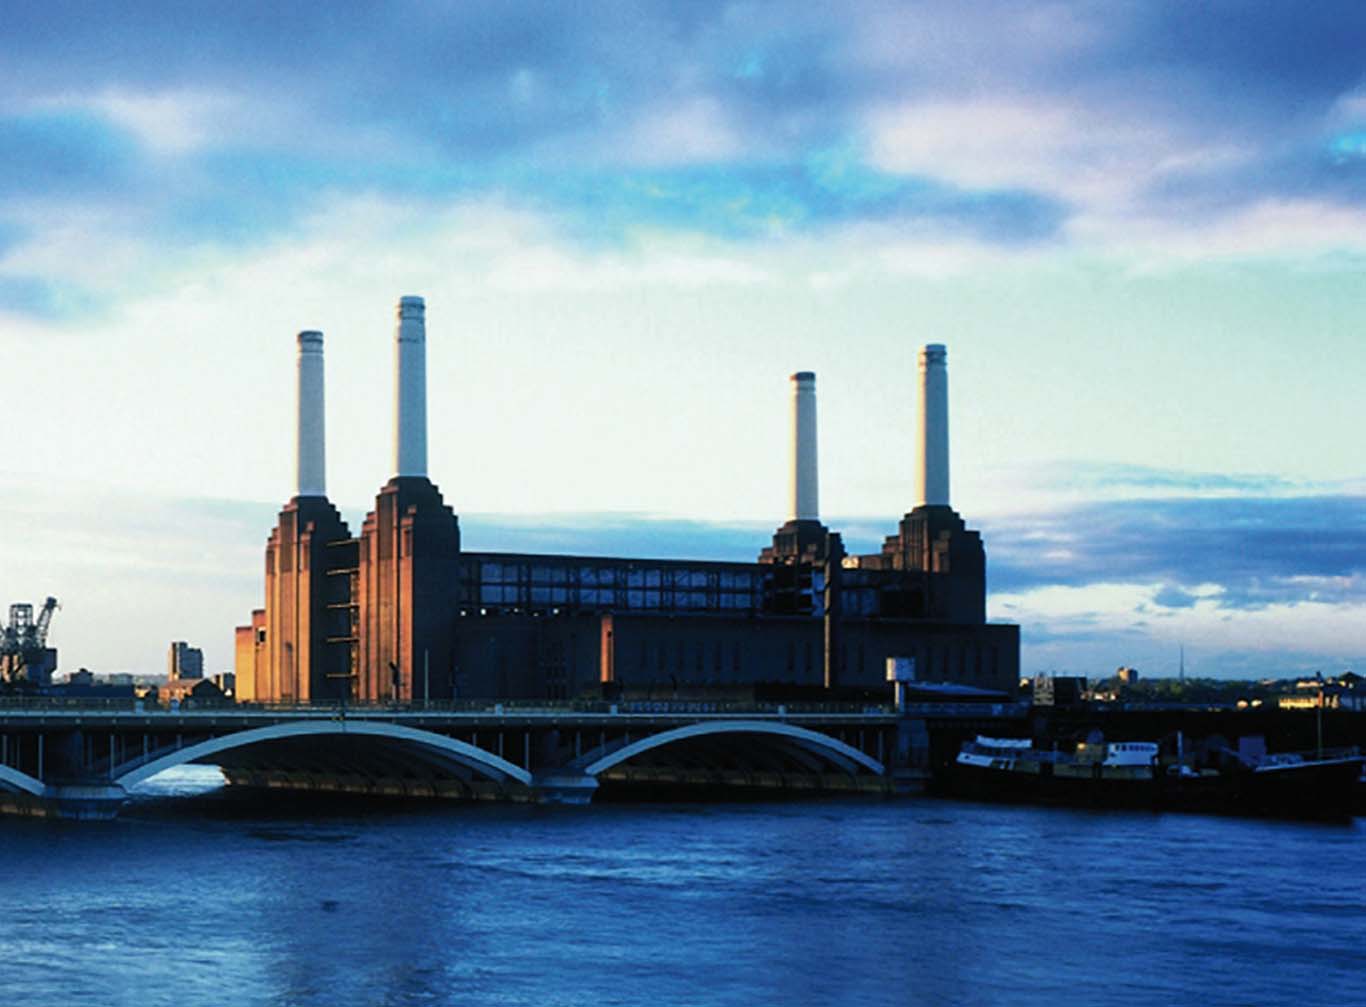 can i visit battersea power station